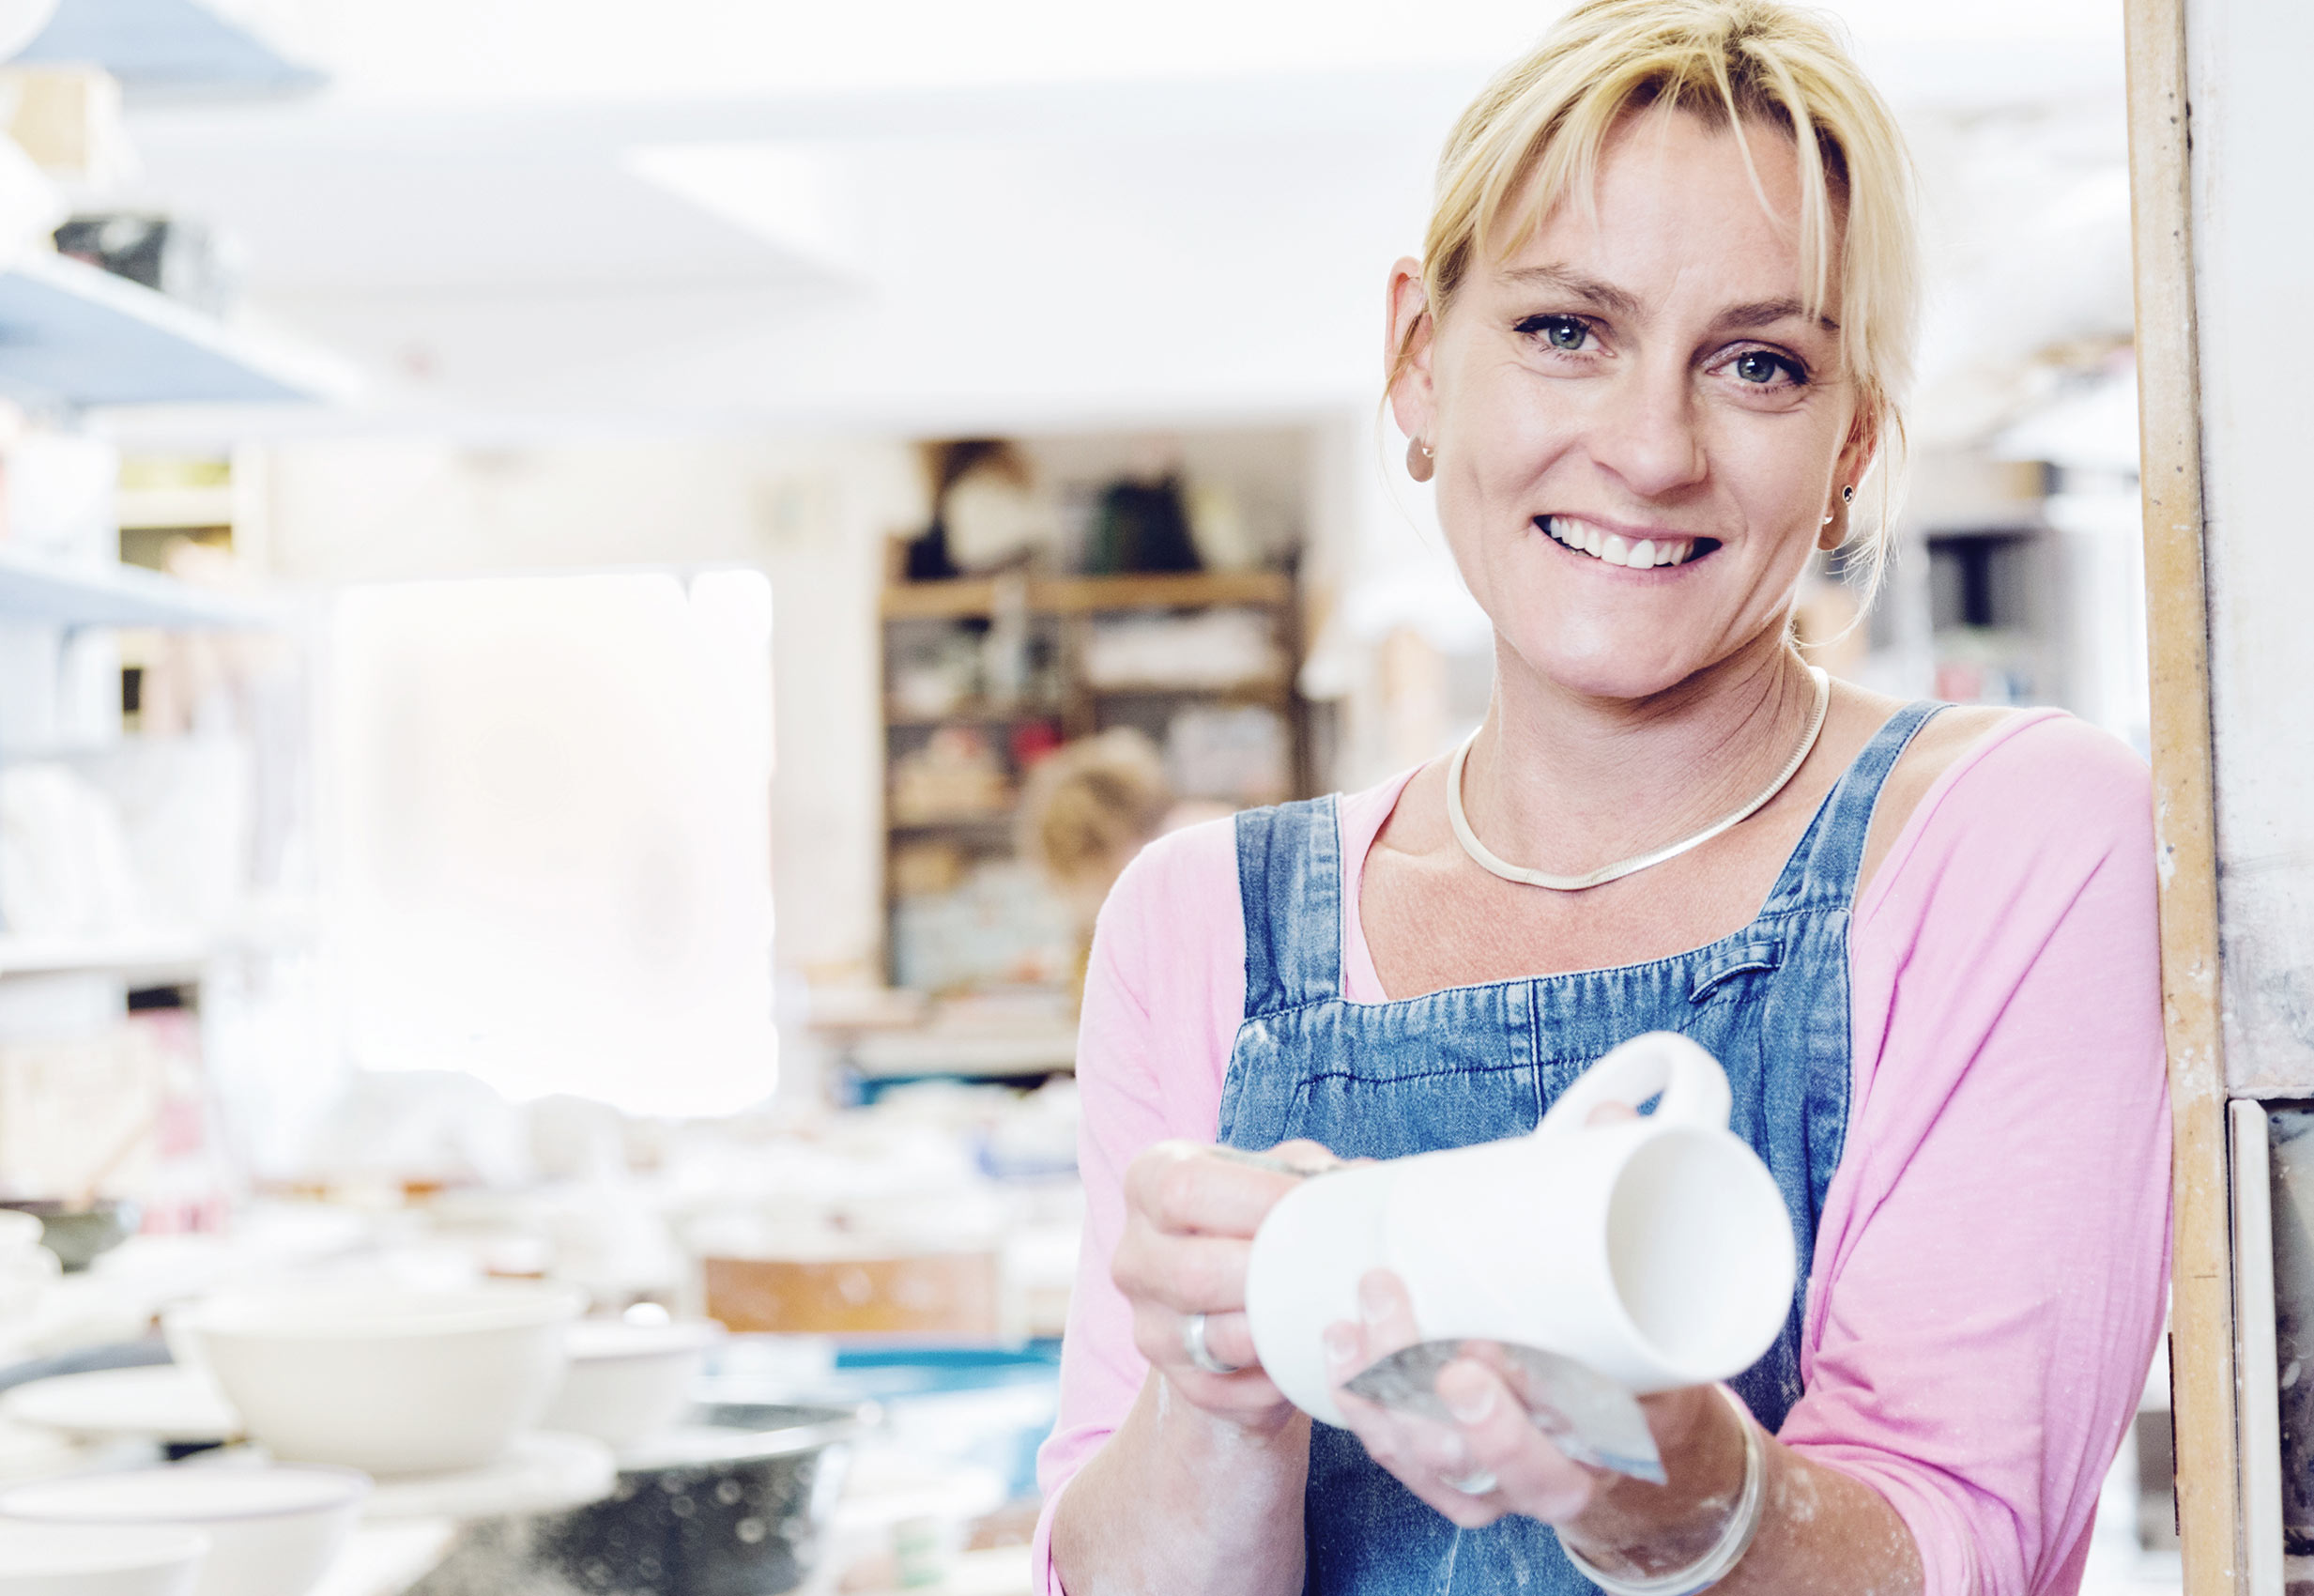 Small business photography - london - female potter holding mug.  Photographed on location in London.  Small business photography, Surrey, UK